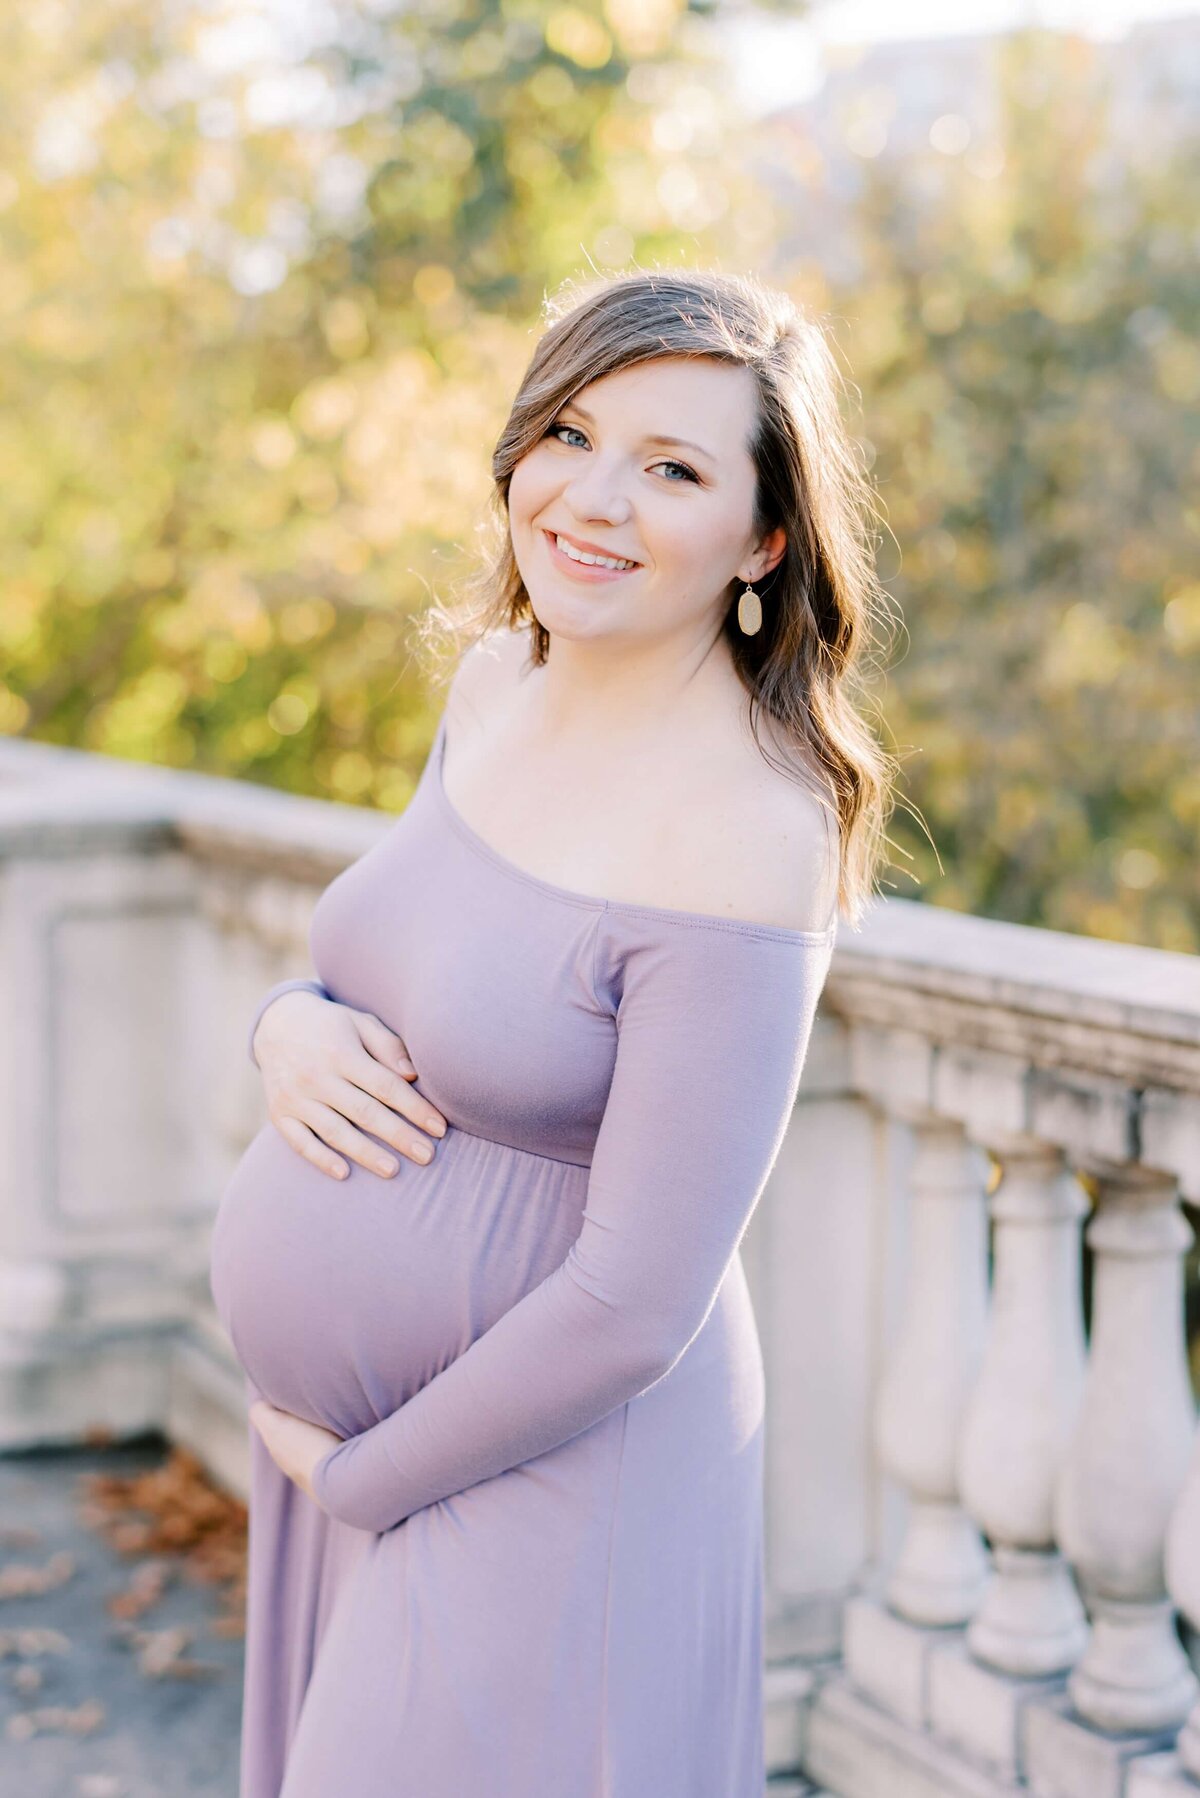 An expectant mom stands in front of a stately stone railing while cradling her growing bump.